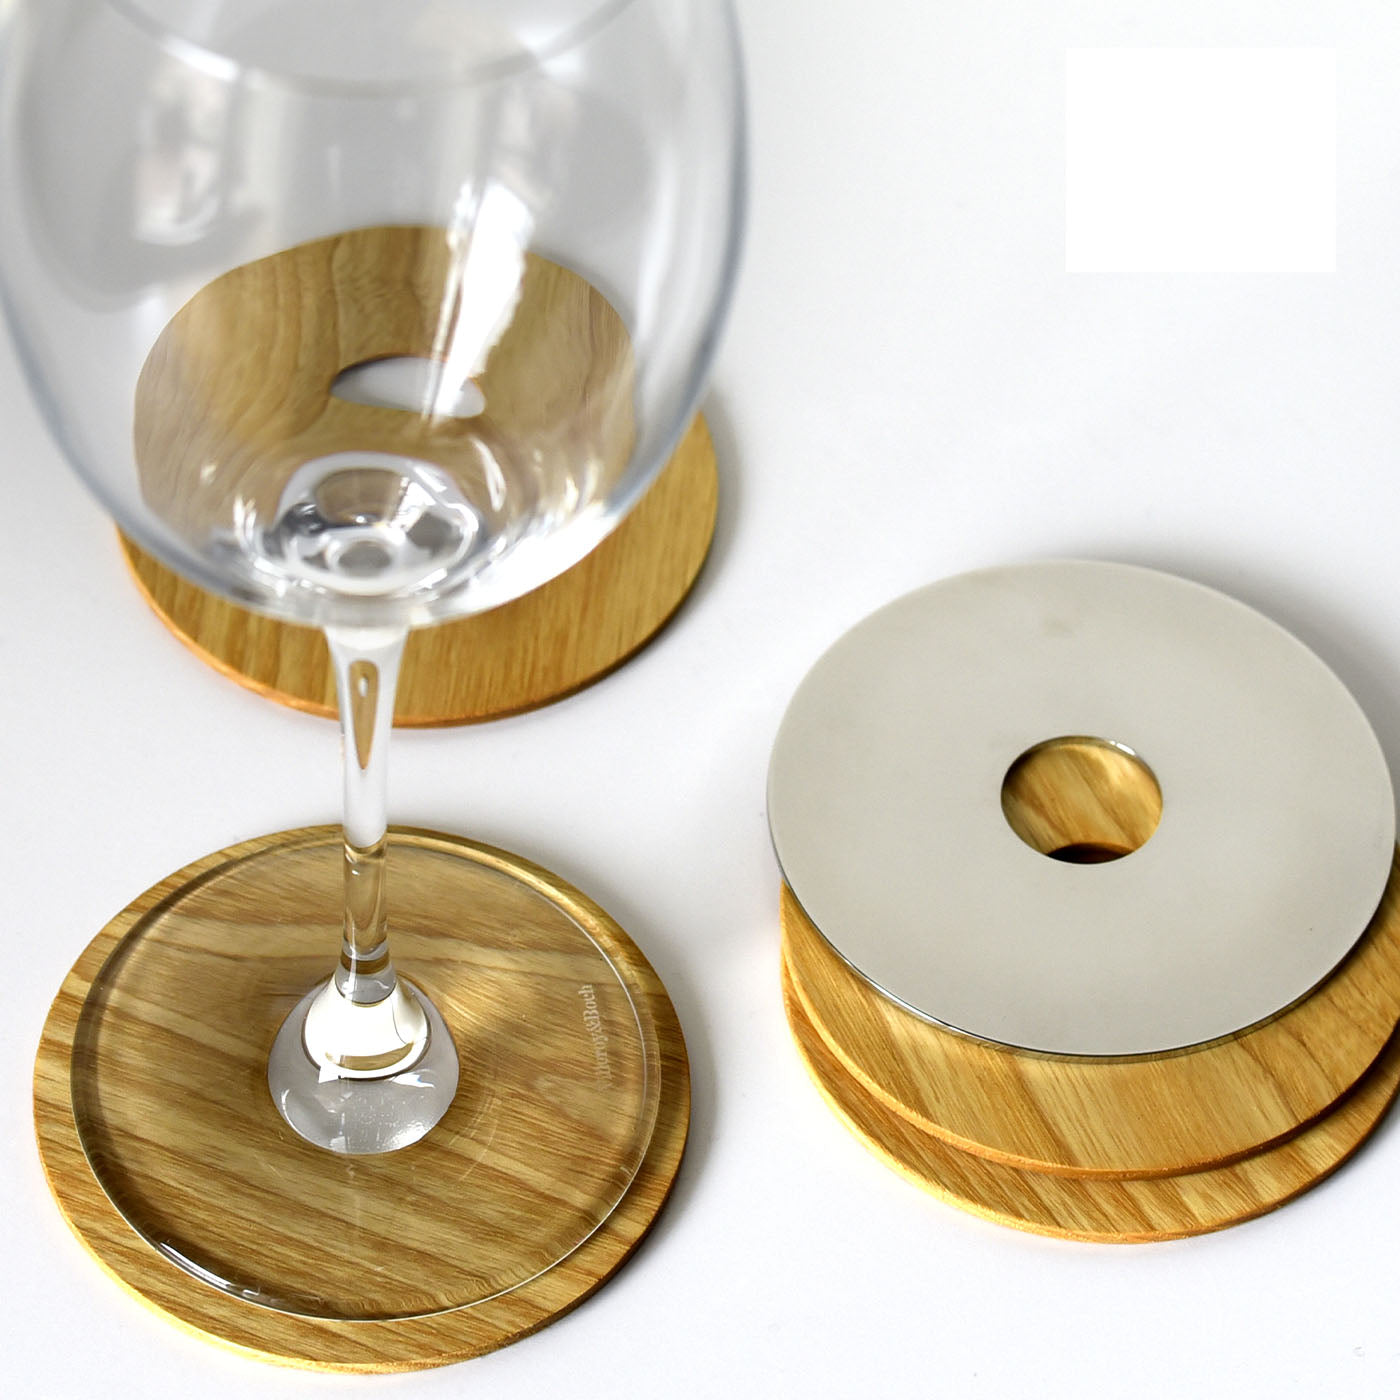 Set of 4 Wooden Coasters - Alternative view 3